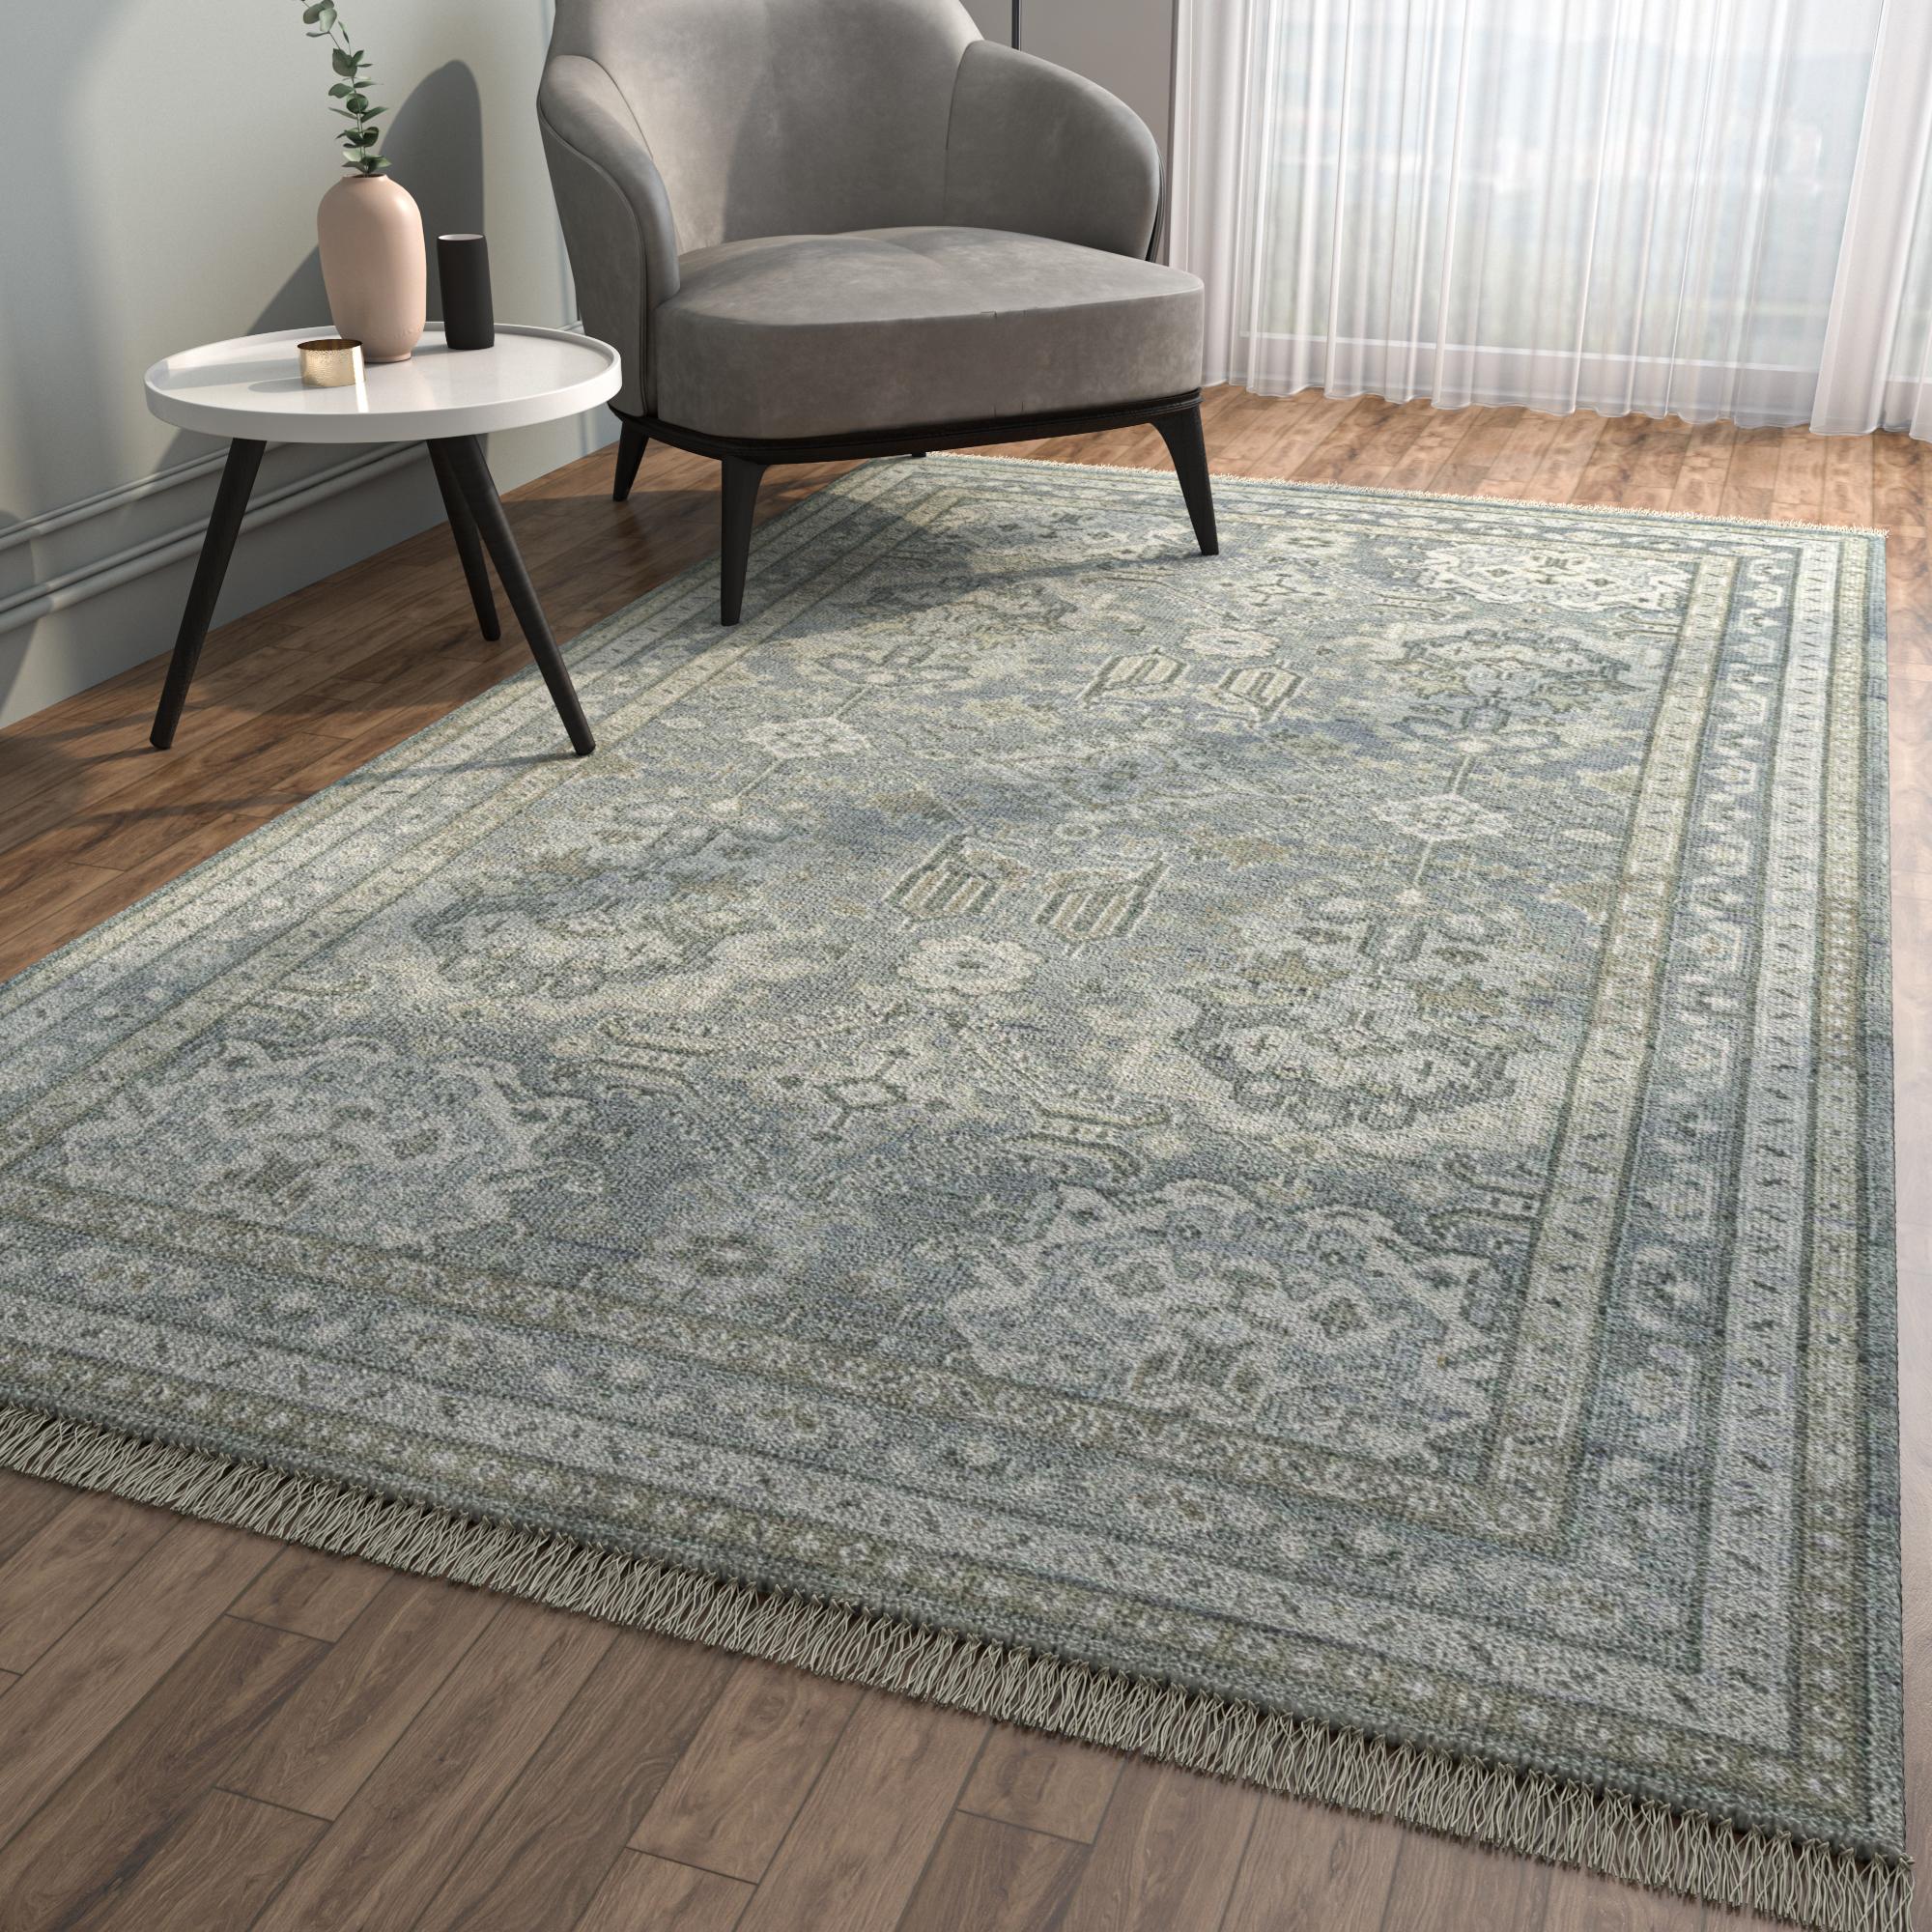 We present a masterpiece in the form of this Hand Knotted Rug, skillfully crafted in the heart of rural India. The Glacier Gray base sets the stage for a harmonious fusion, while the BlueBell border adds a touch of sophistication. Meticulously